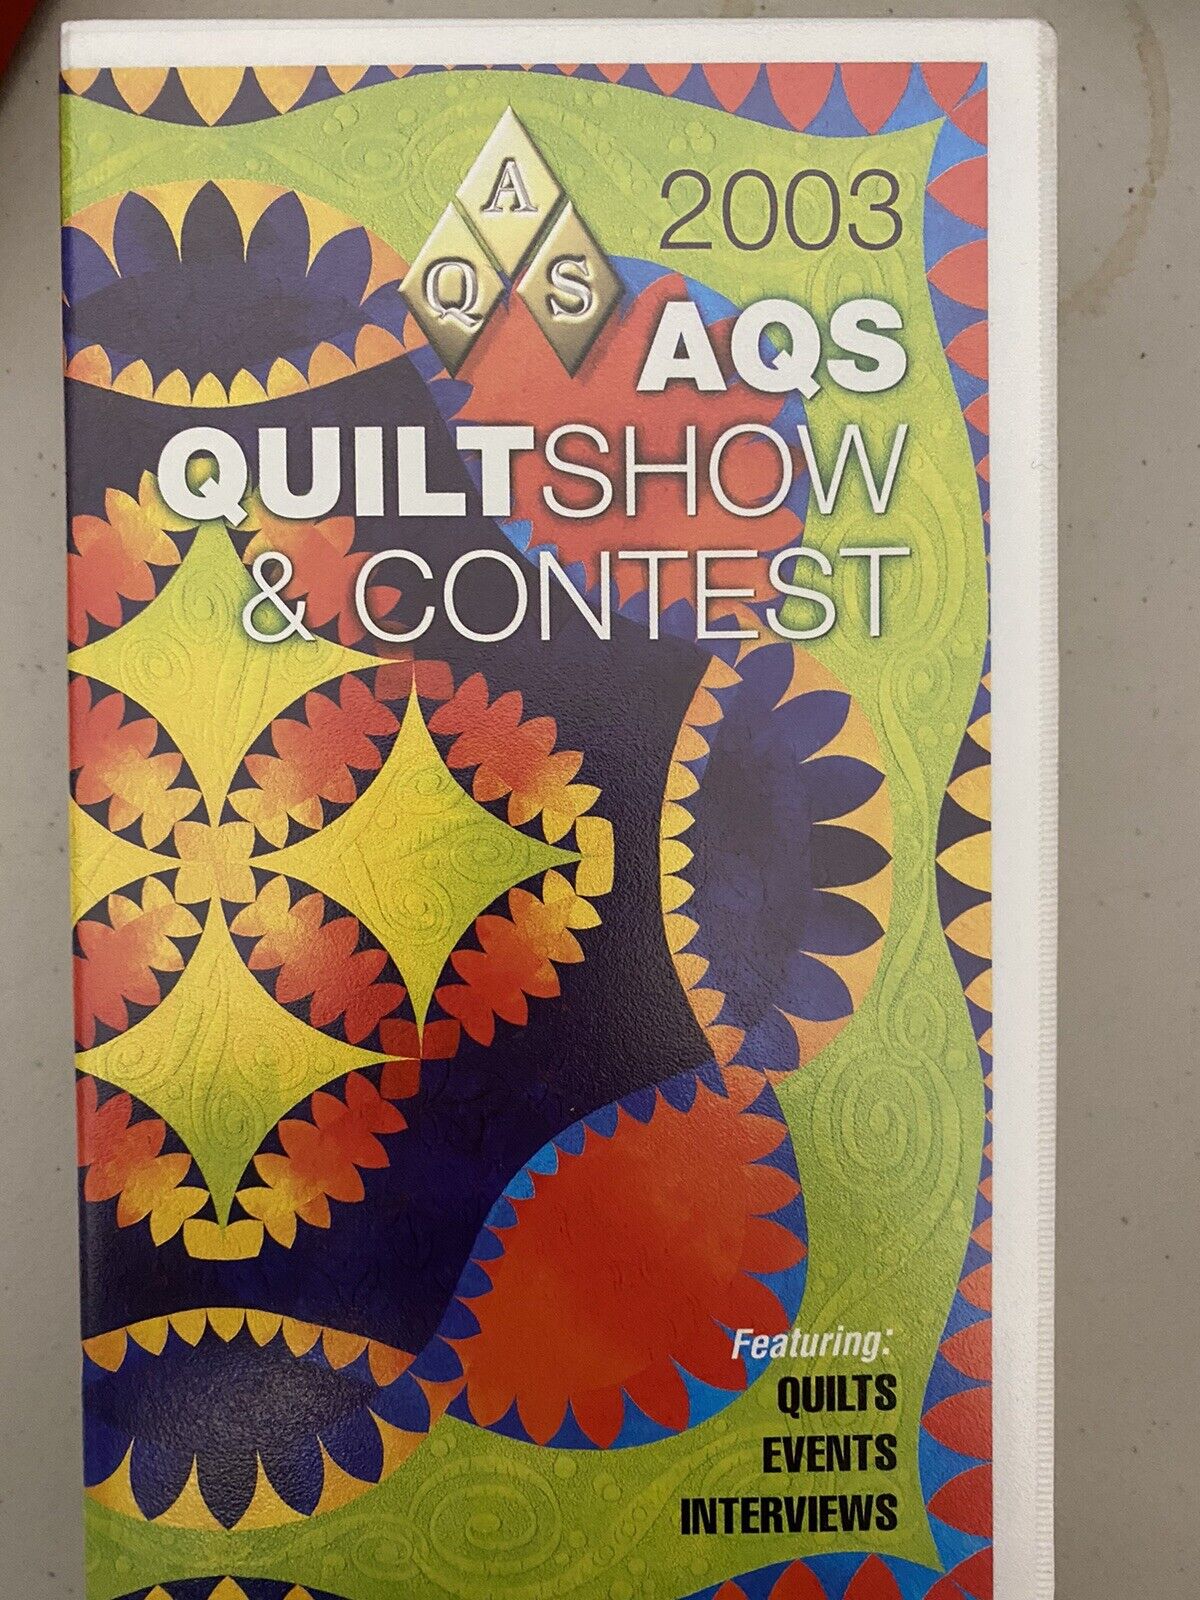 VHS American Quilter’s Society Quilt show & contest 2003  